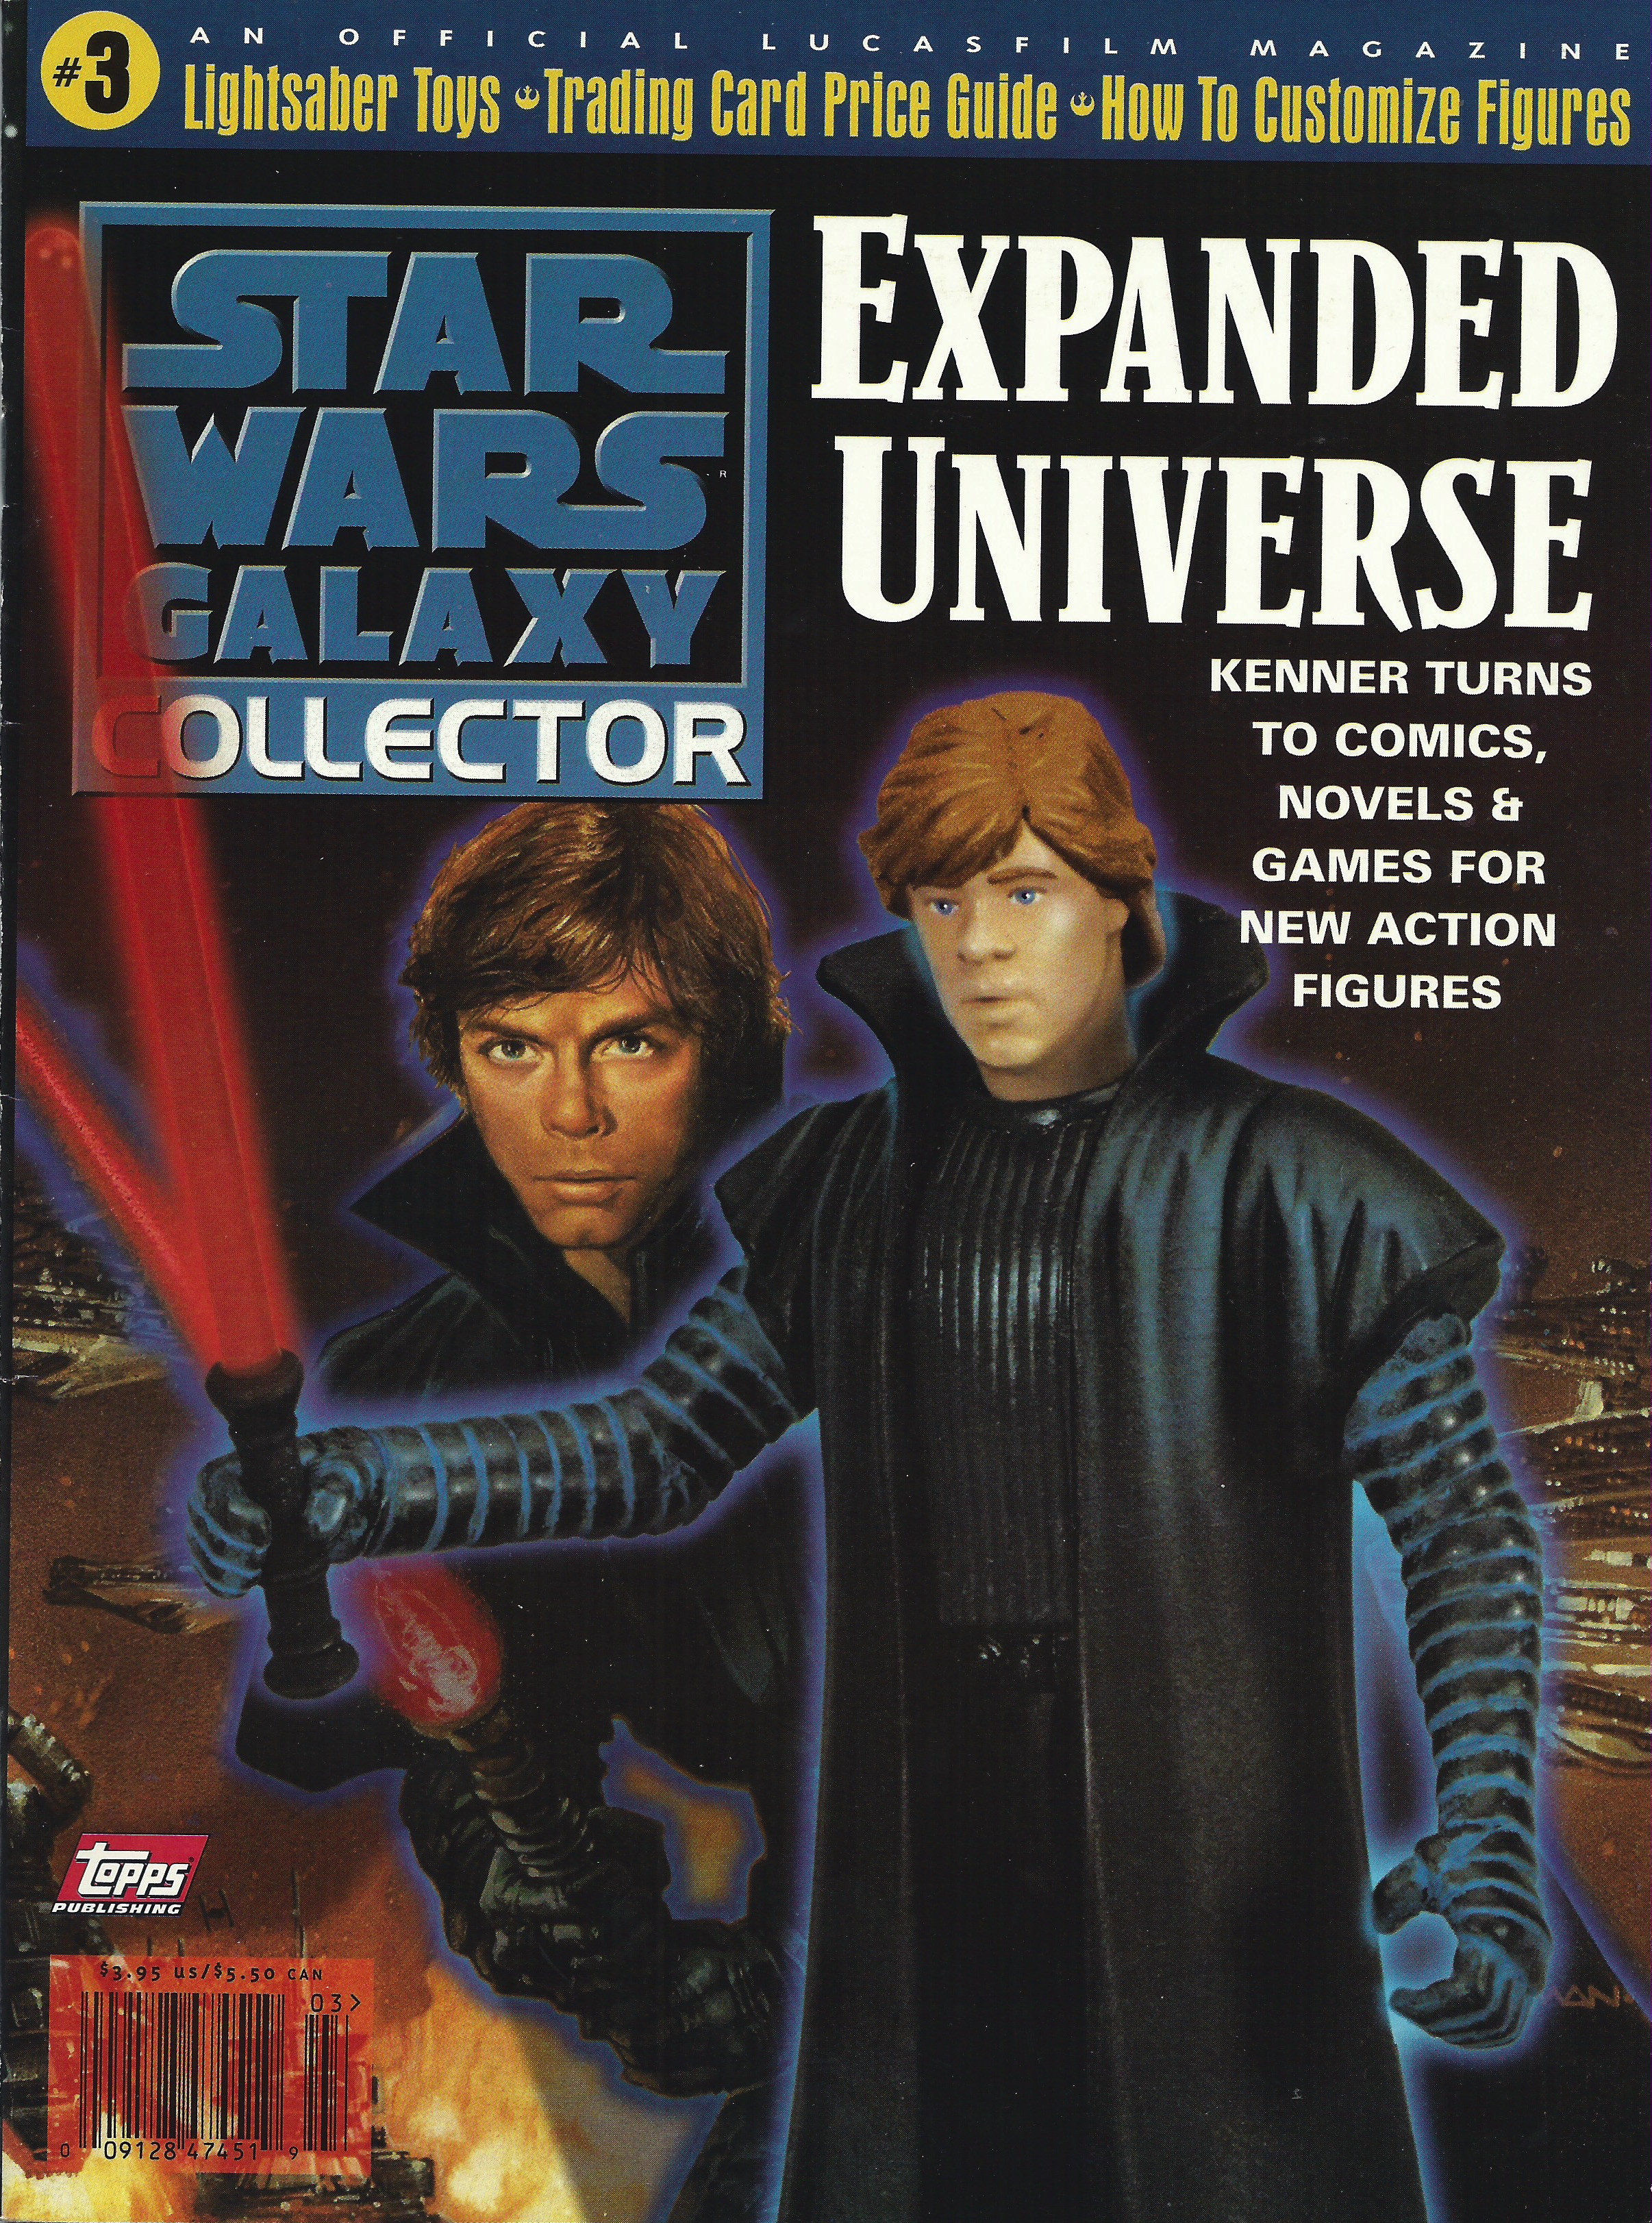 A Universe of Star Wars Collectibles – Warehouse Books